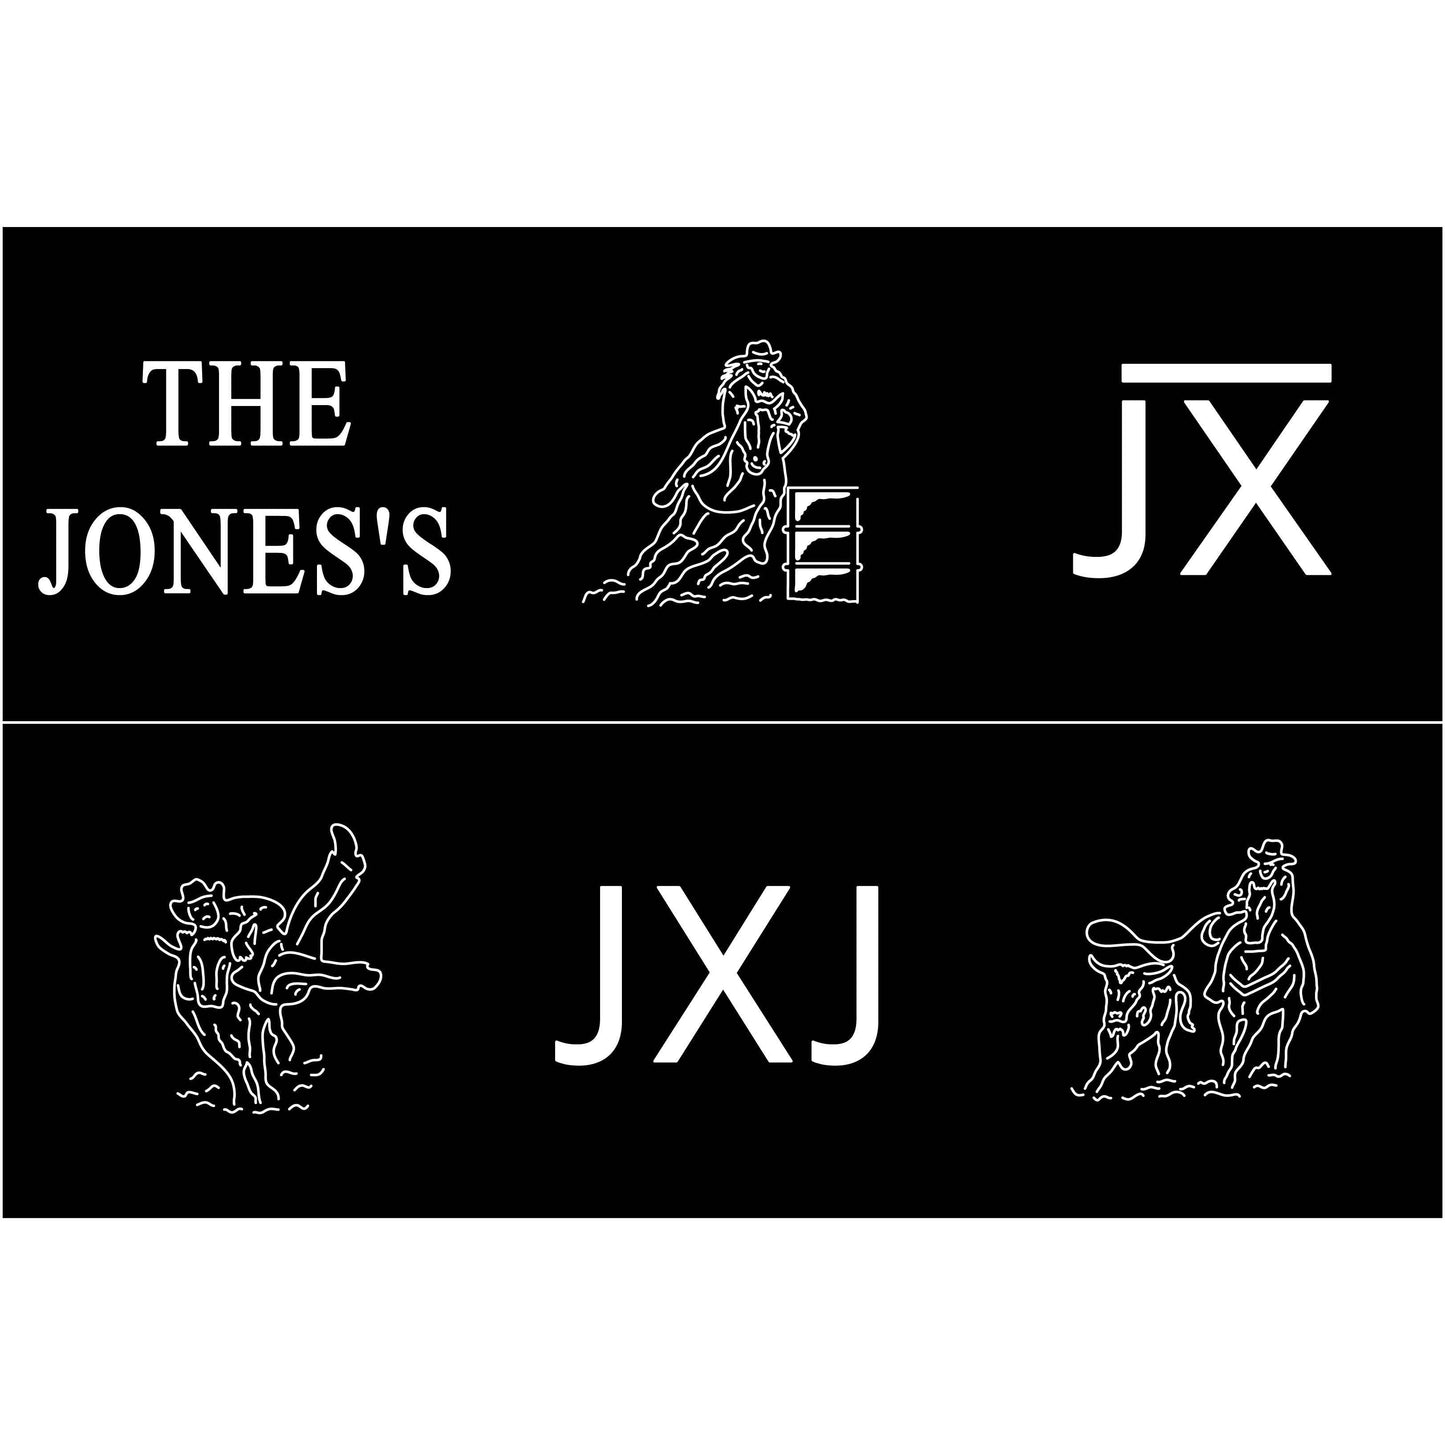 Fire Pit Jone's with barrel race, calf roper and steer wrestler-DXFforCNC.com-DXF Files cut ready cnc machines